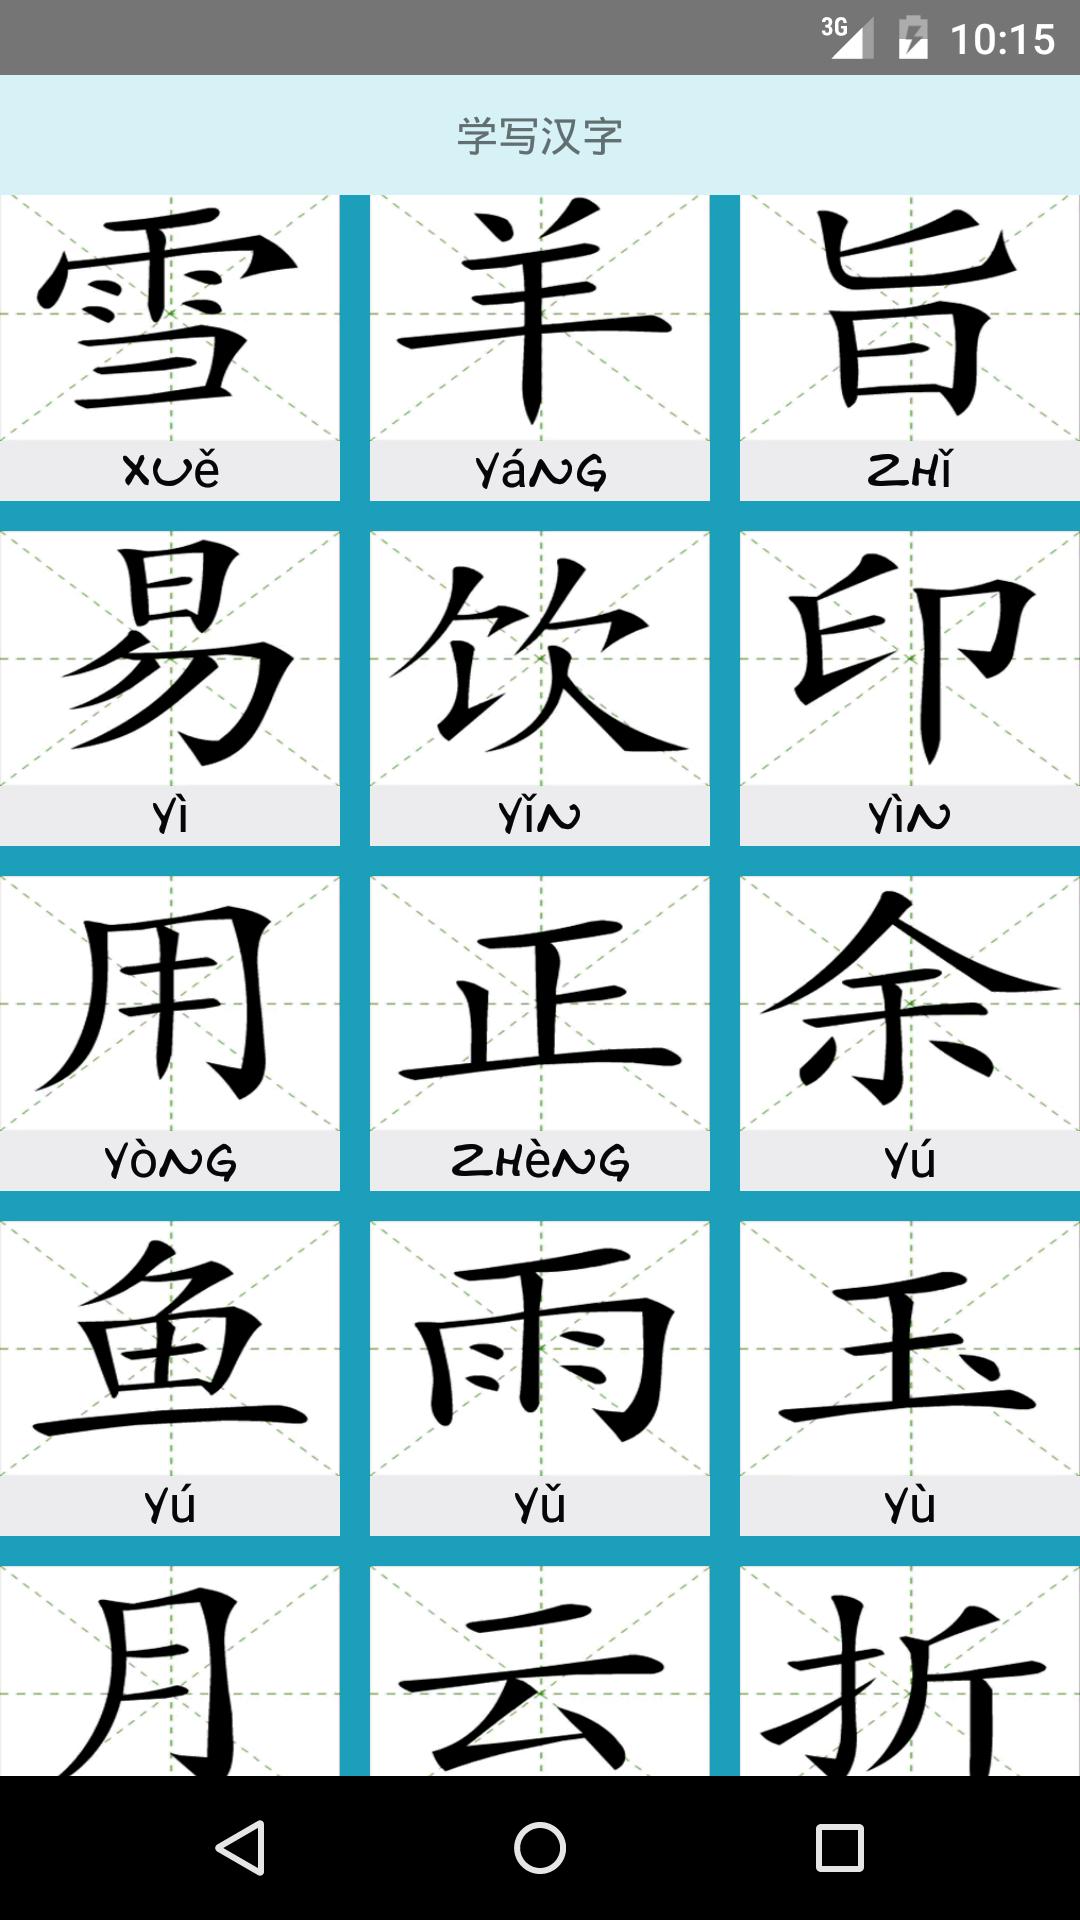 Learn to Write Chinese Words for Android - APK Download